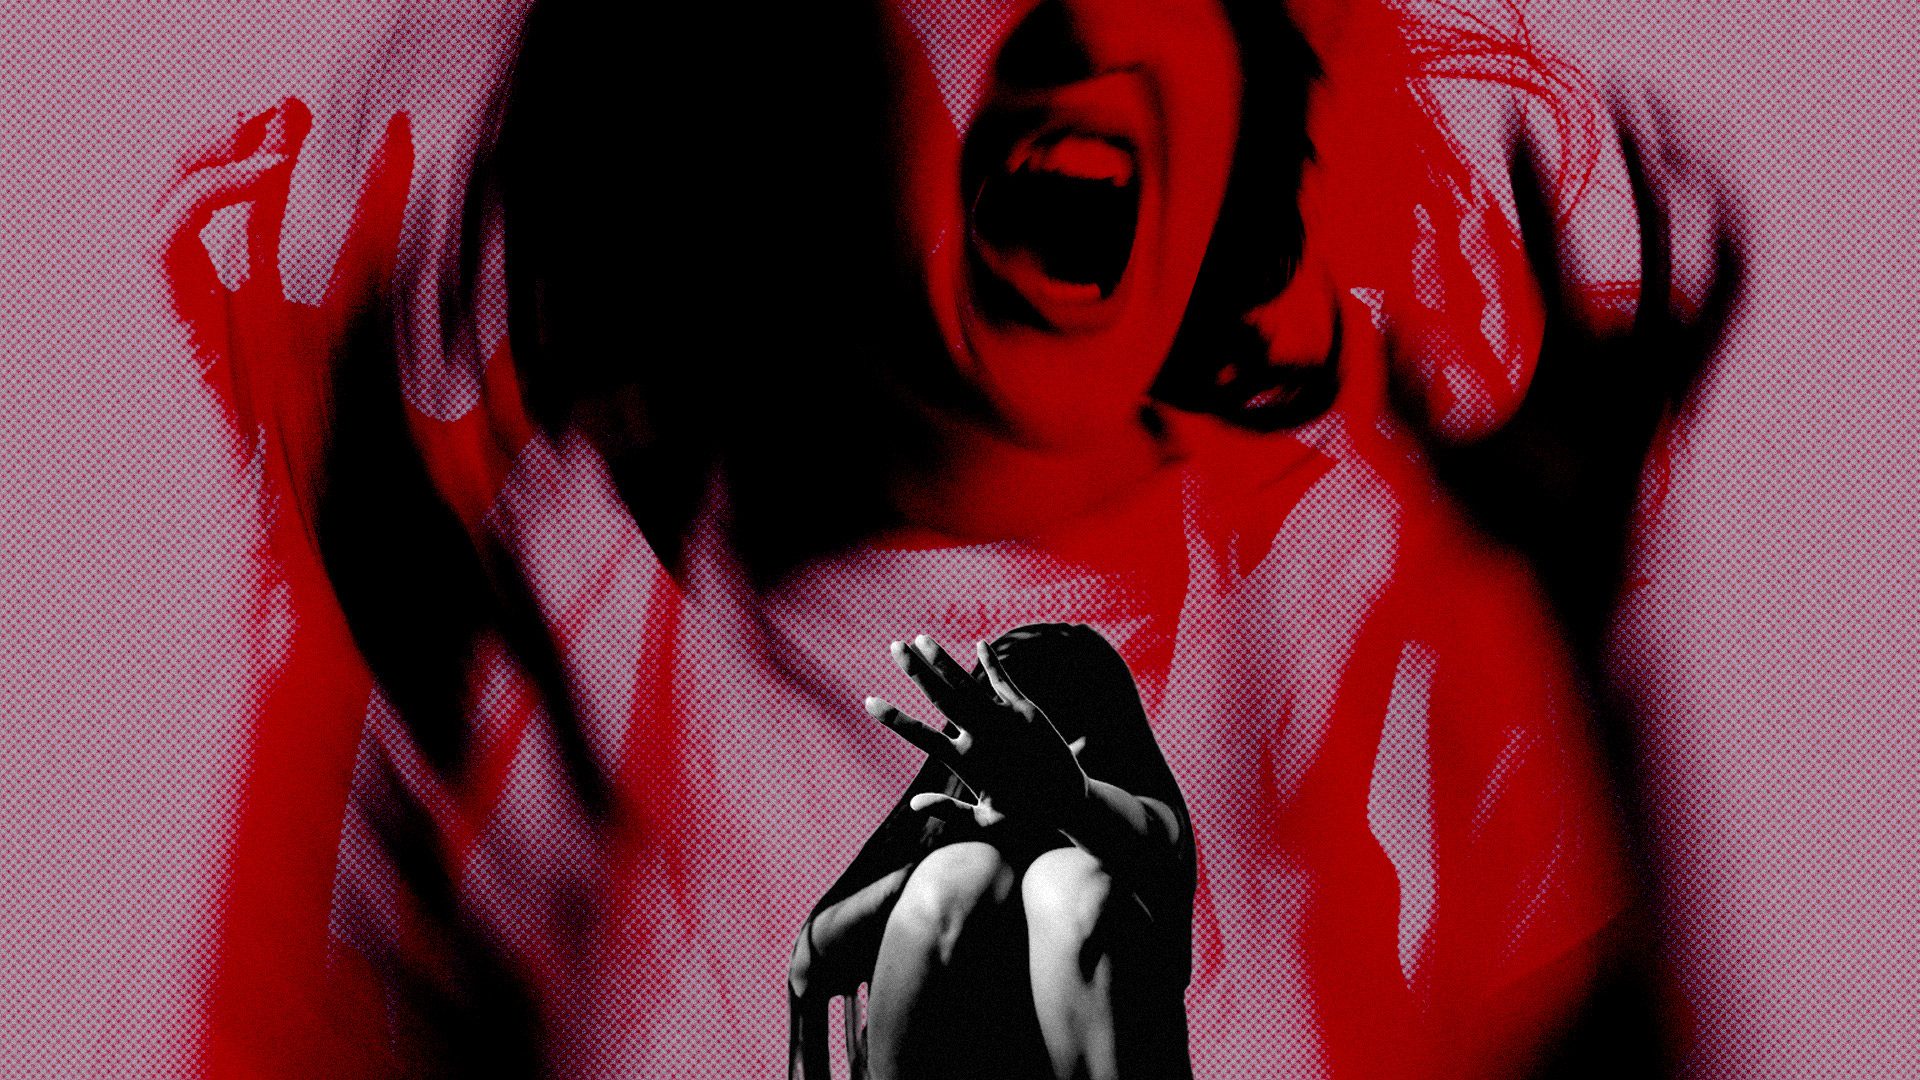 [Two Pronged] My ex-girlfriend was very abusive, and it’s scaring me from lesbian relationships